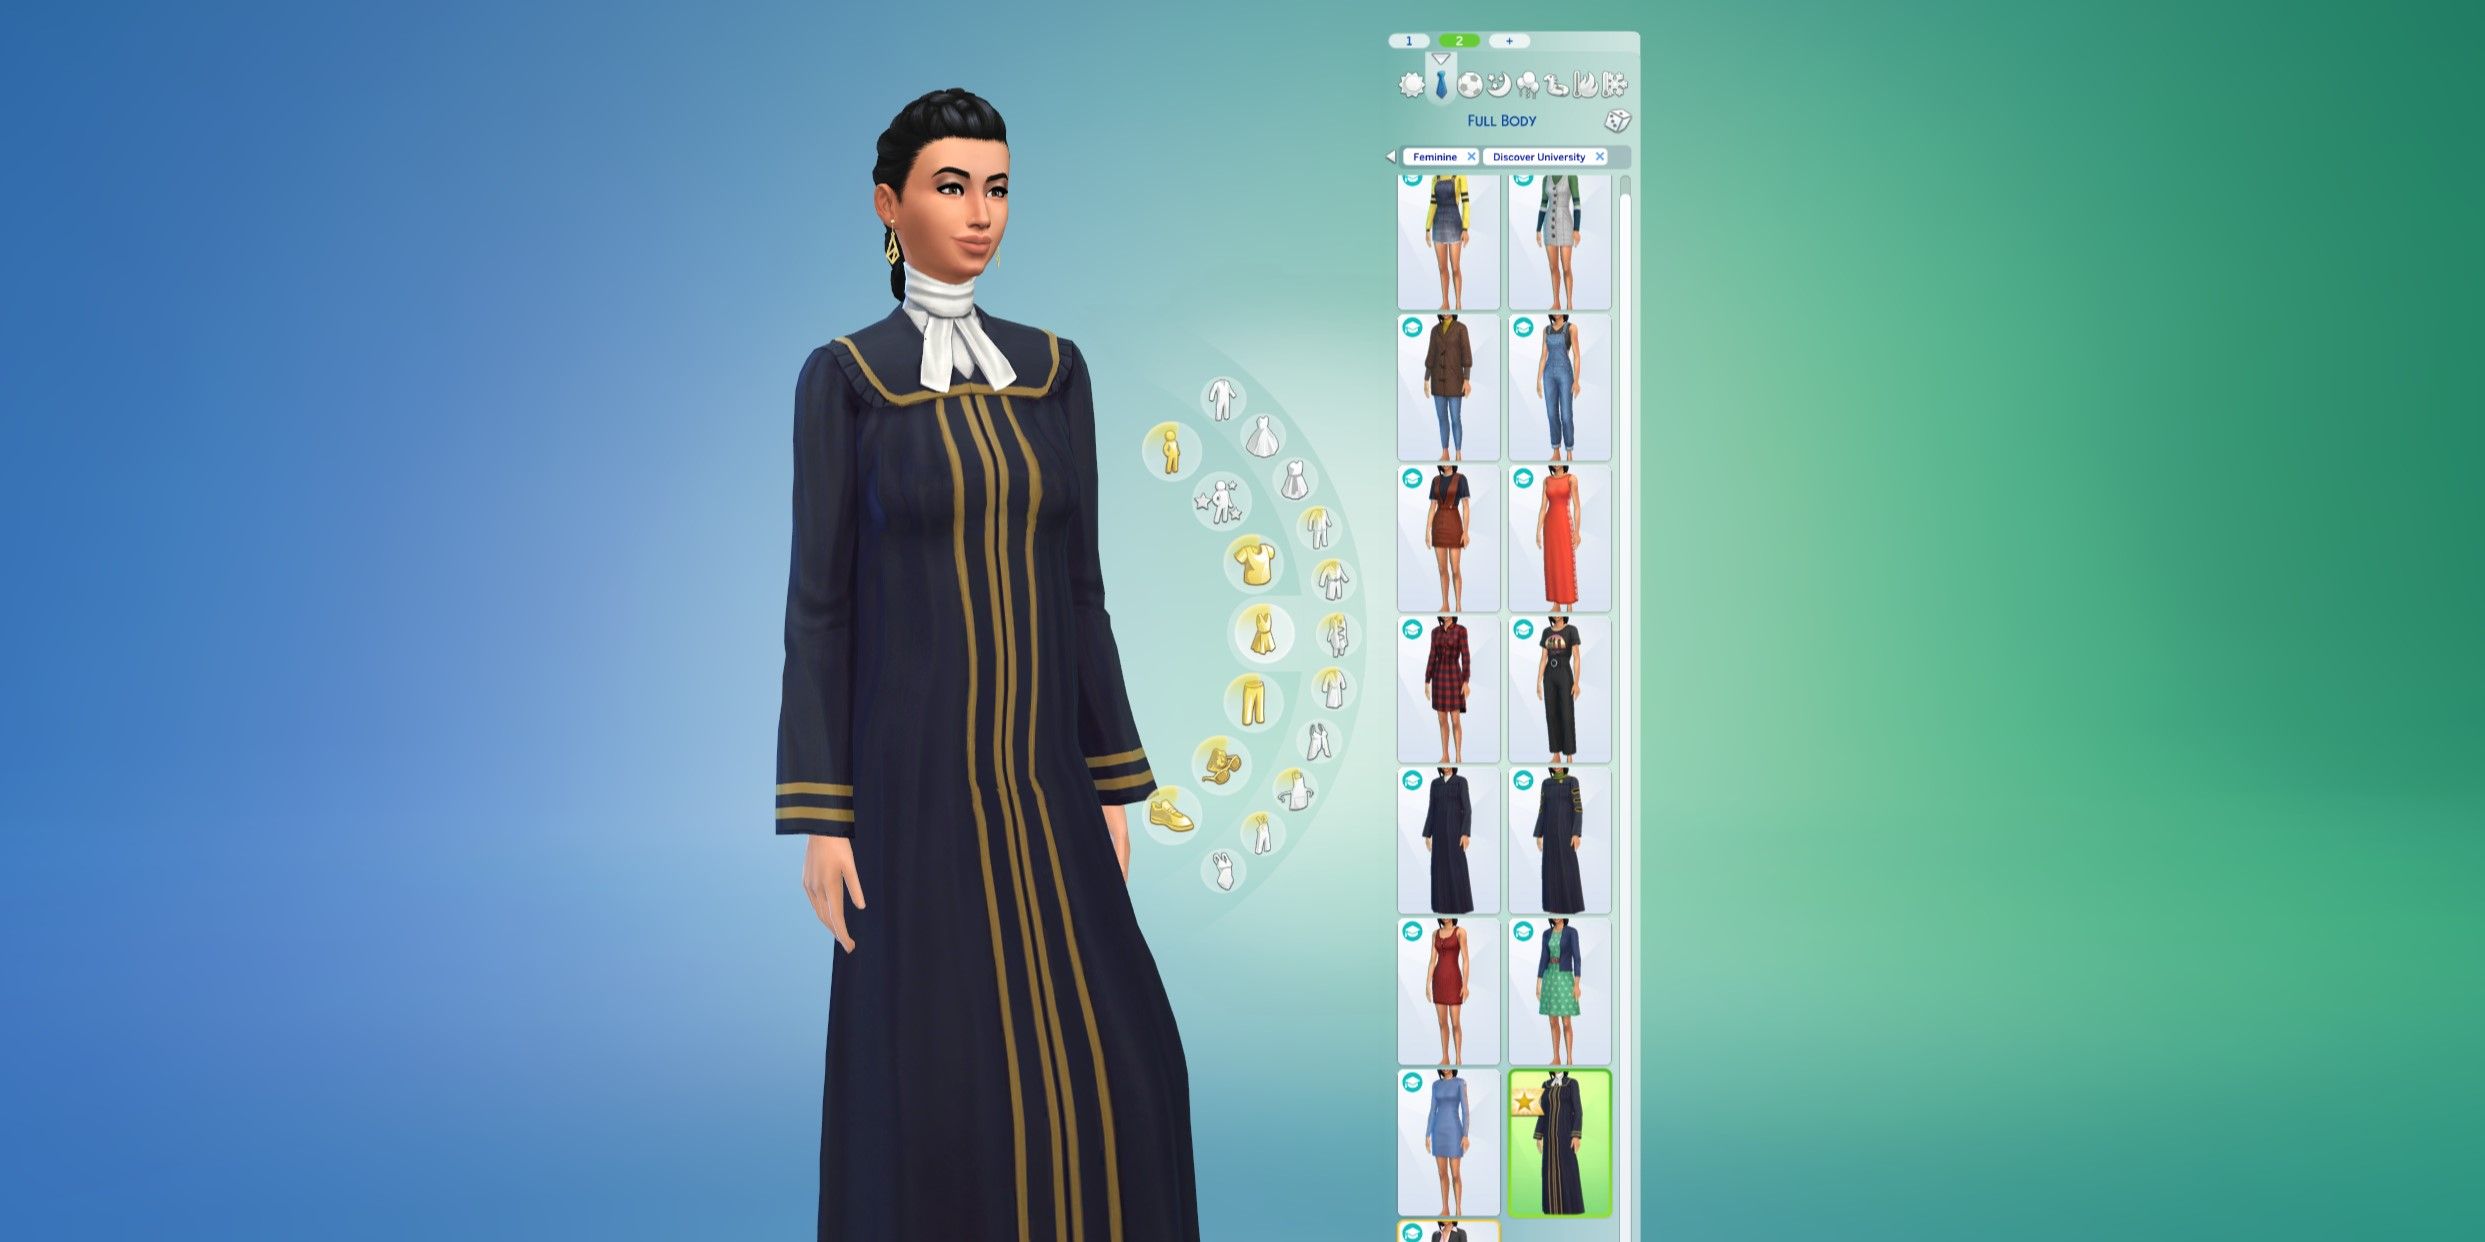 The Sims 4: An image of a Sim in judicial robes